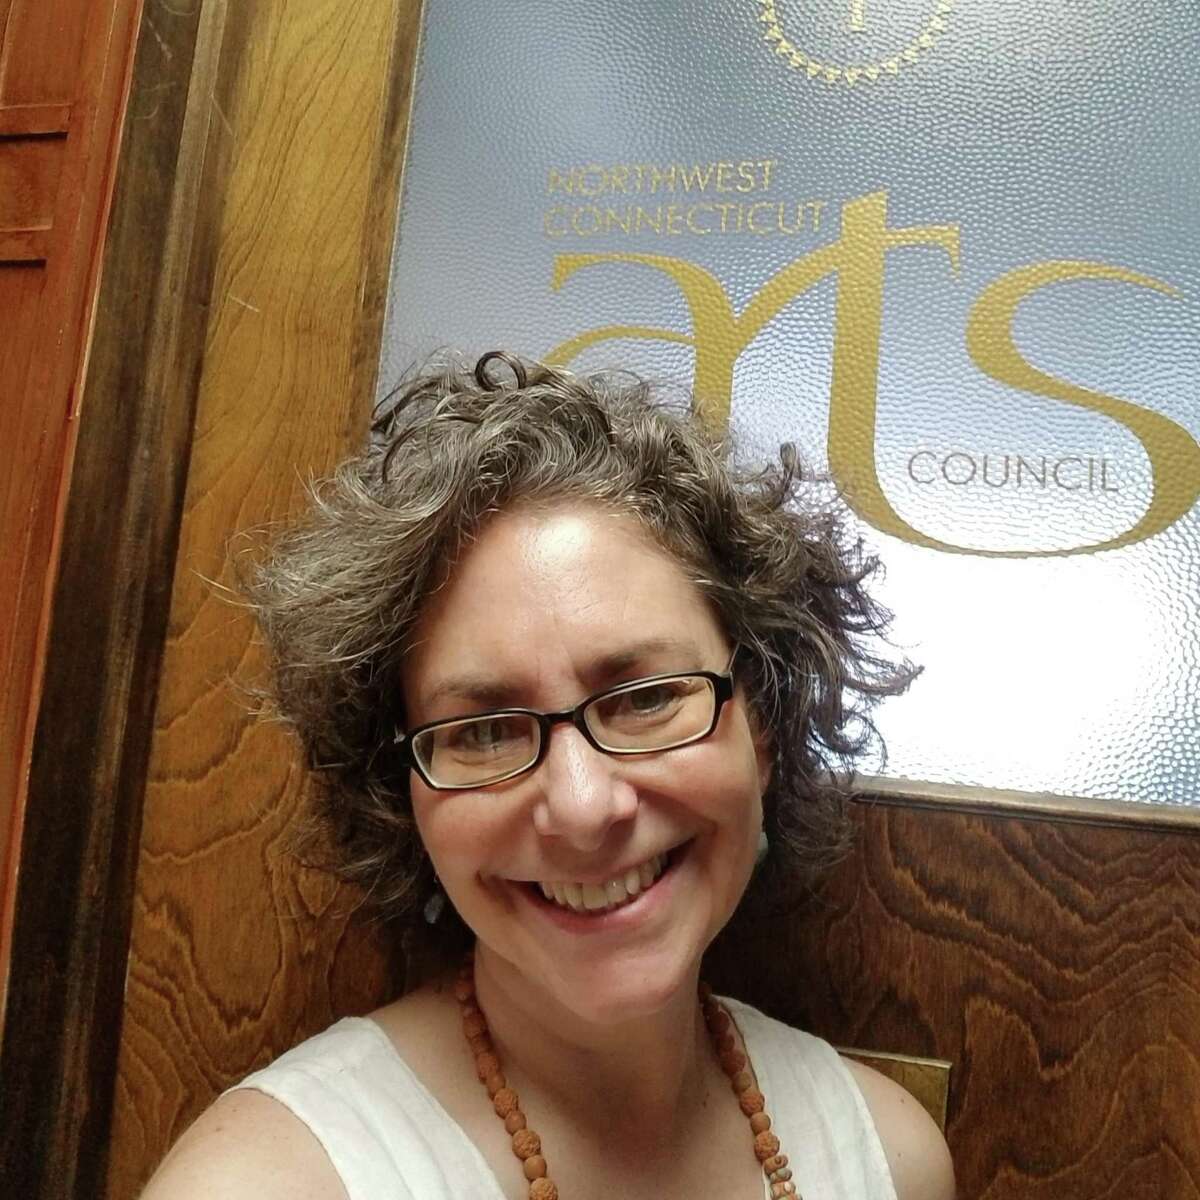 Amy Wynn, executive director of the Northwest Connecticut Arts C0uncil, is leaving the organization for a job with the American Mural Project in Winsted. She will continue to assist the council until a replacement is found.